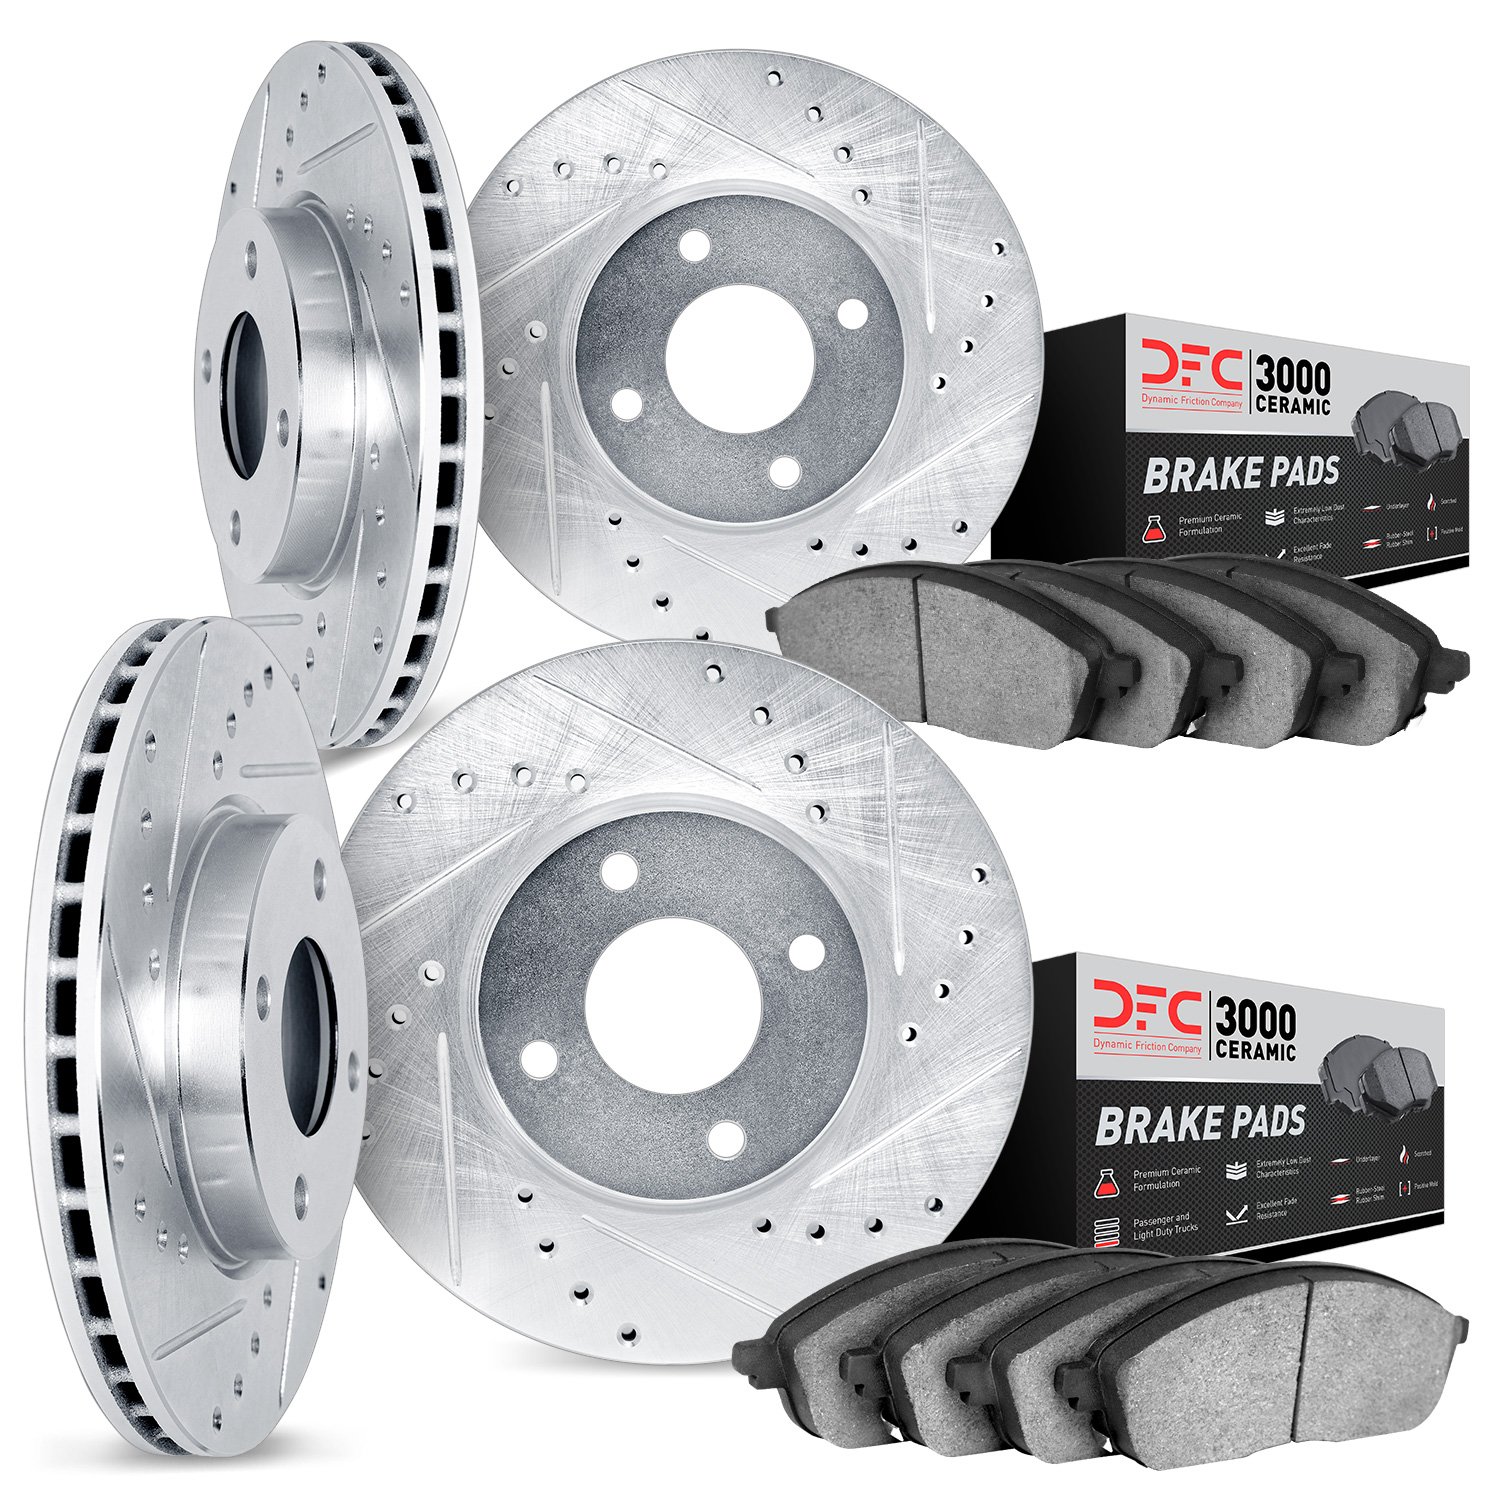 7304-56022 Drilled/Slotted Brake Rotor with 3000-Series Ceramic Brake Pads Kit [Silver], 1998-2000 Ford/Lincoln/Mercury/Mazda, P